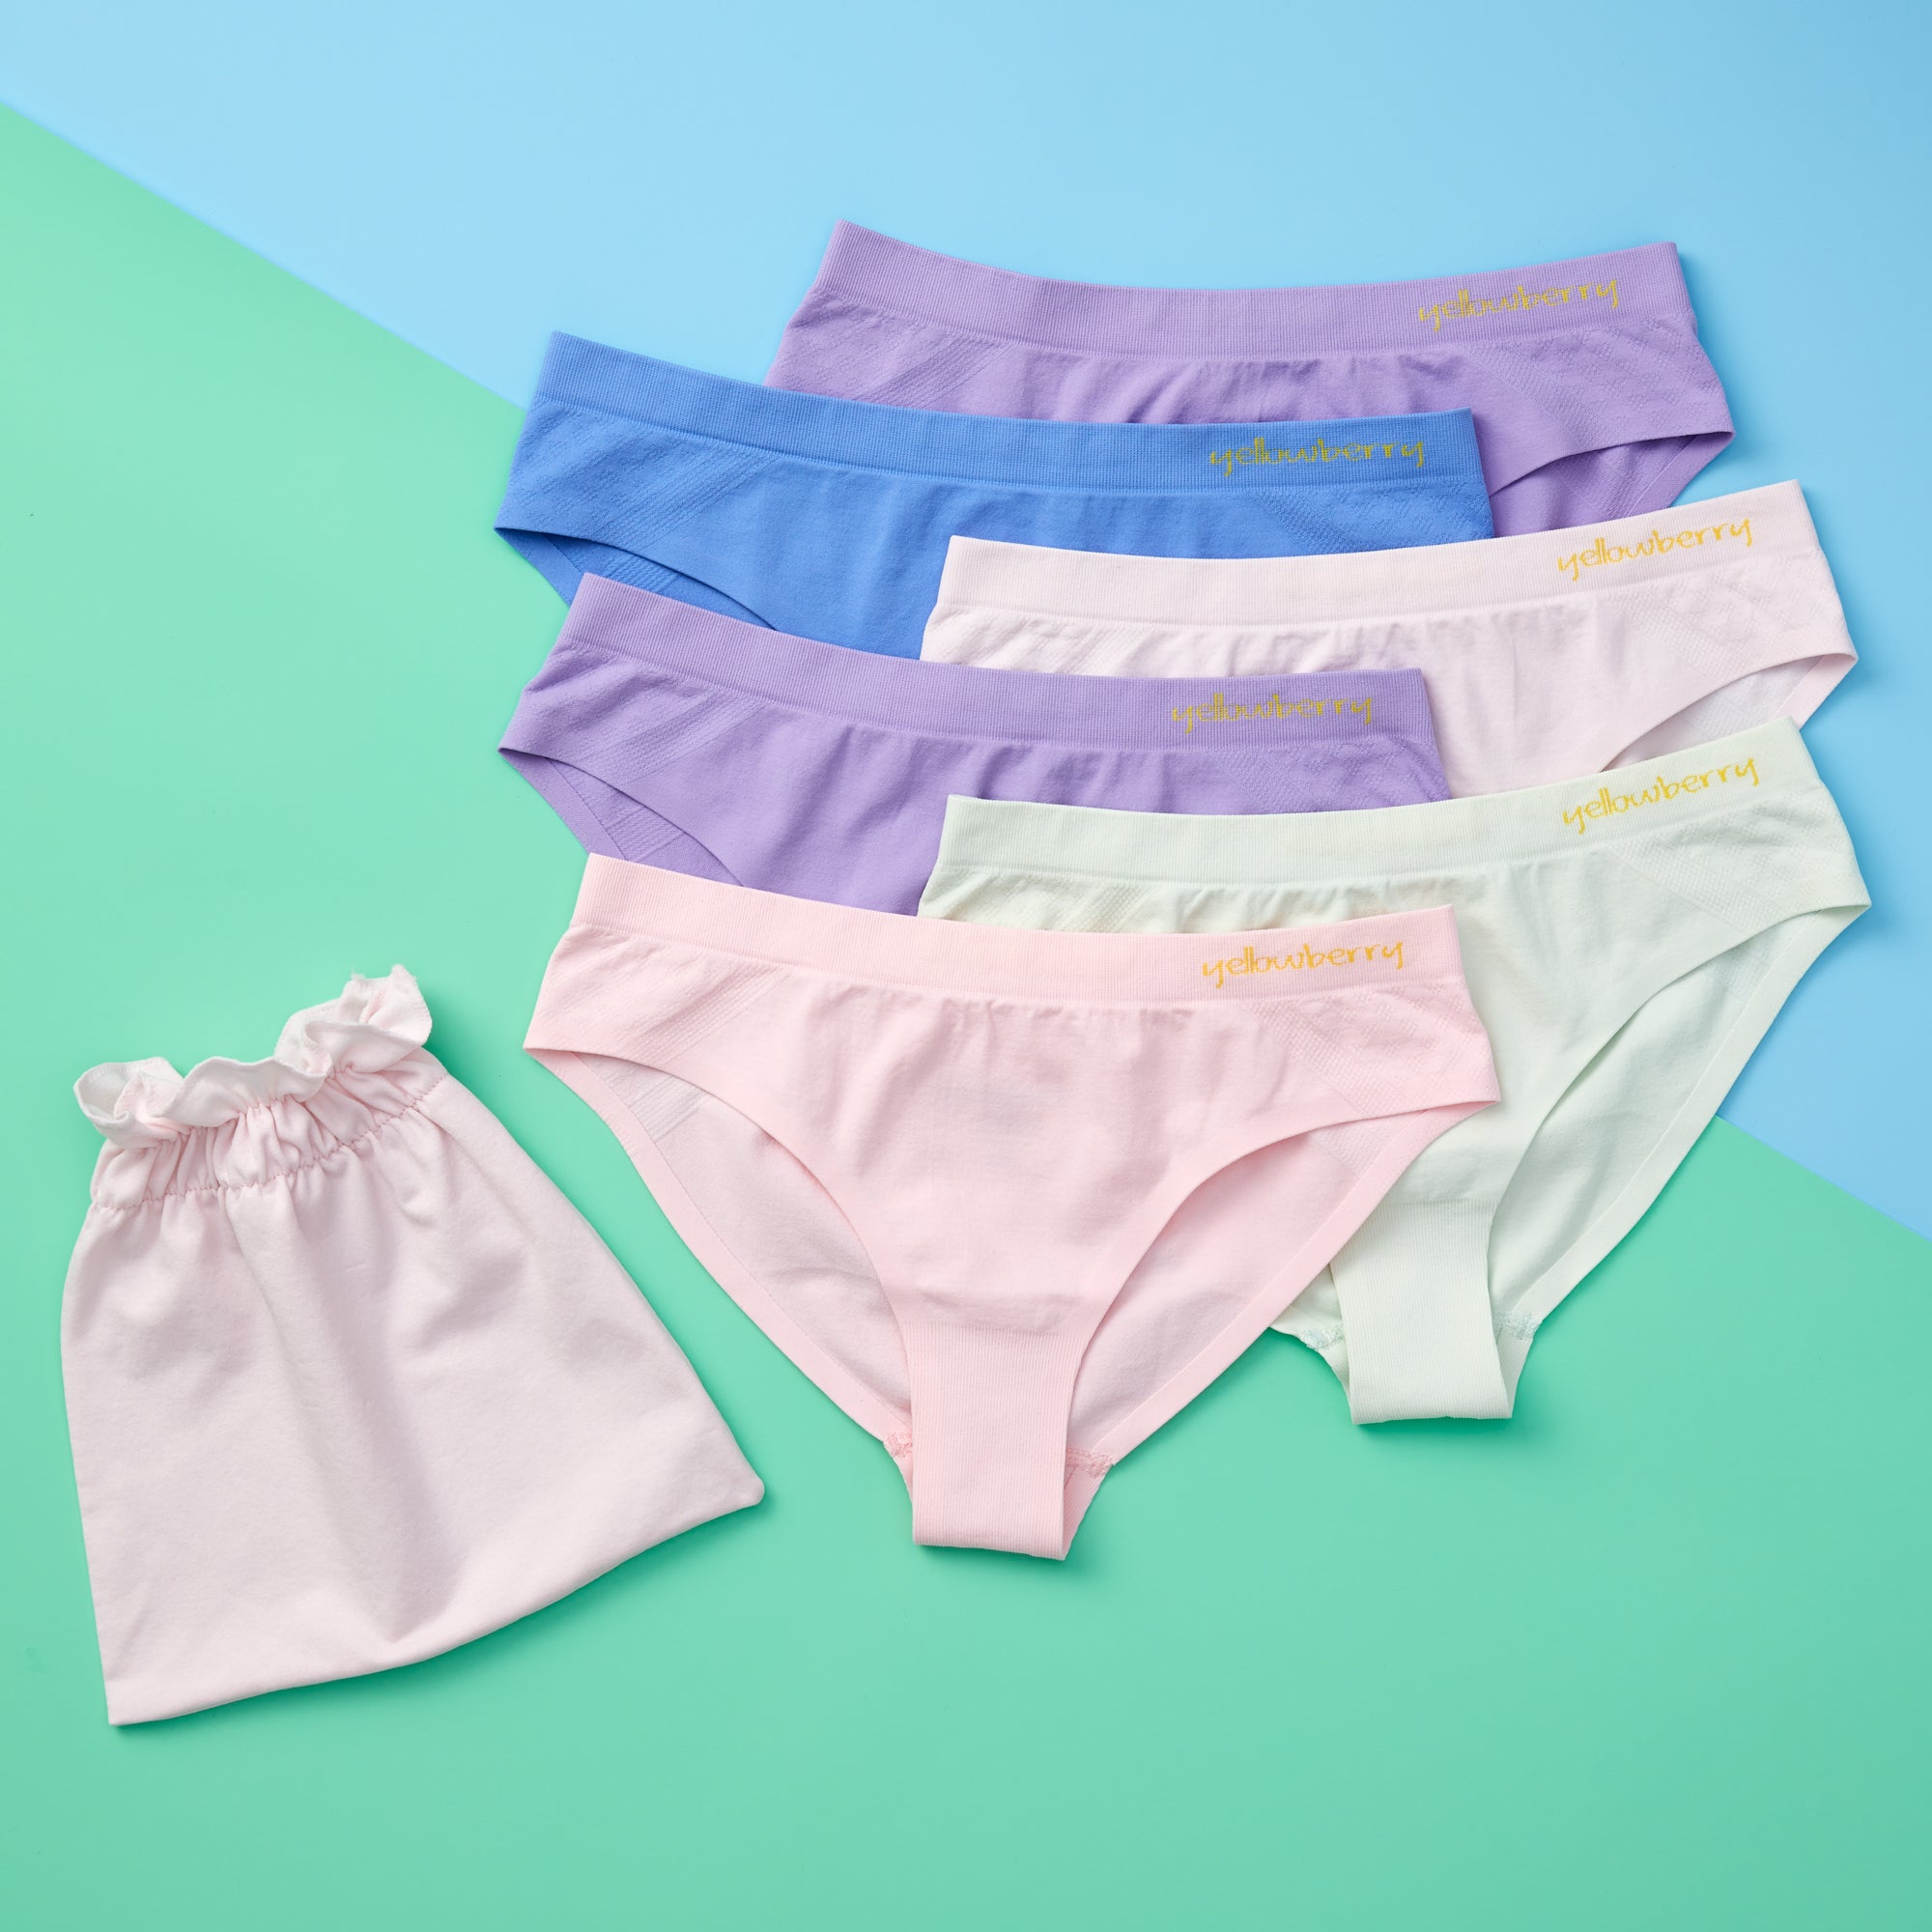 How Many Pairs of Underwear Should a Girl Own?